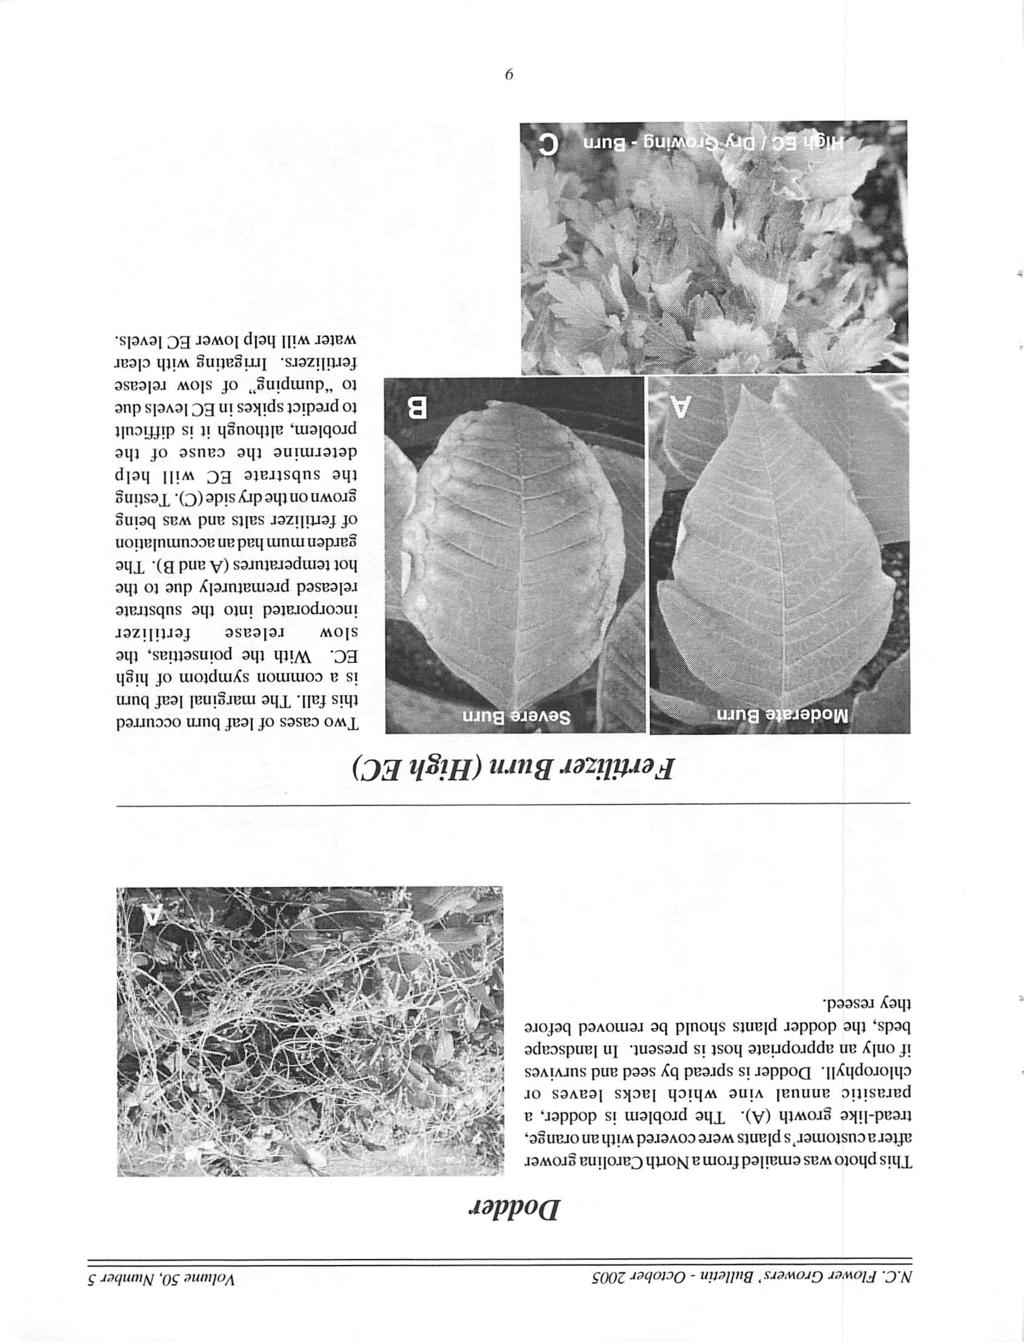 N.C. Flower Growers' Bulletin - October 2005 Volume 50, Number 5 This photo was emailedfroma North Carolina grower after a customer's plants were covered with an orange, tread-like growth (A).